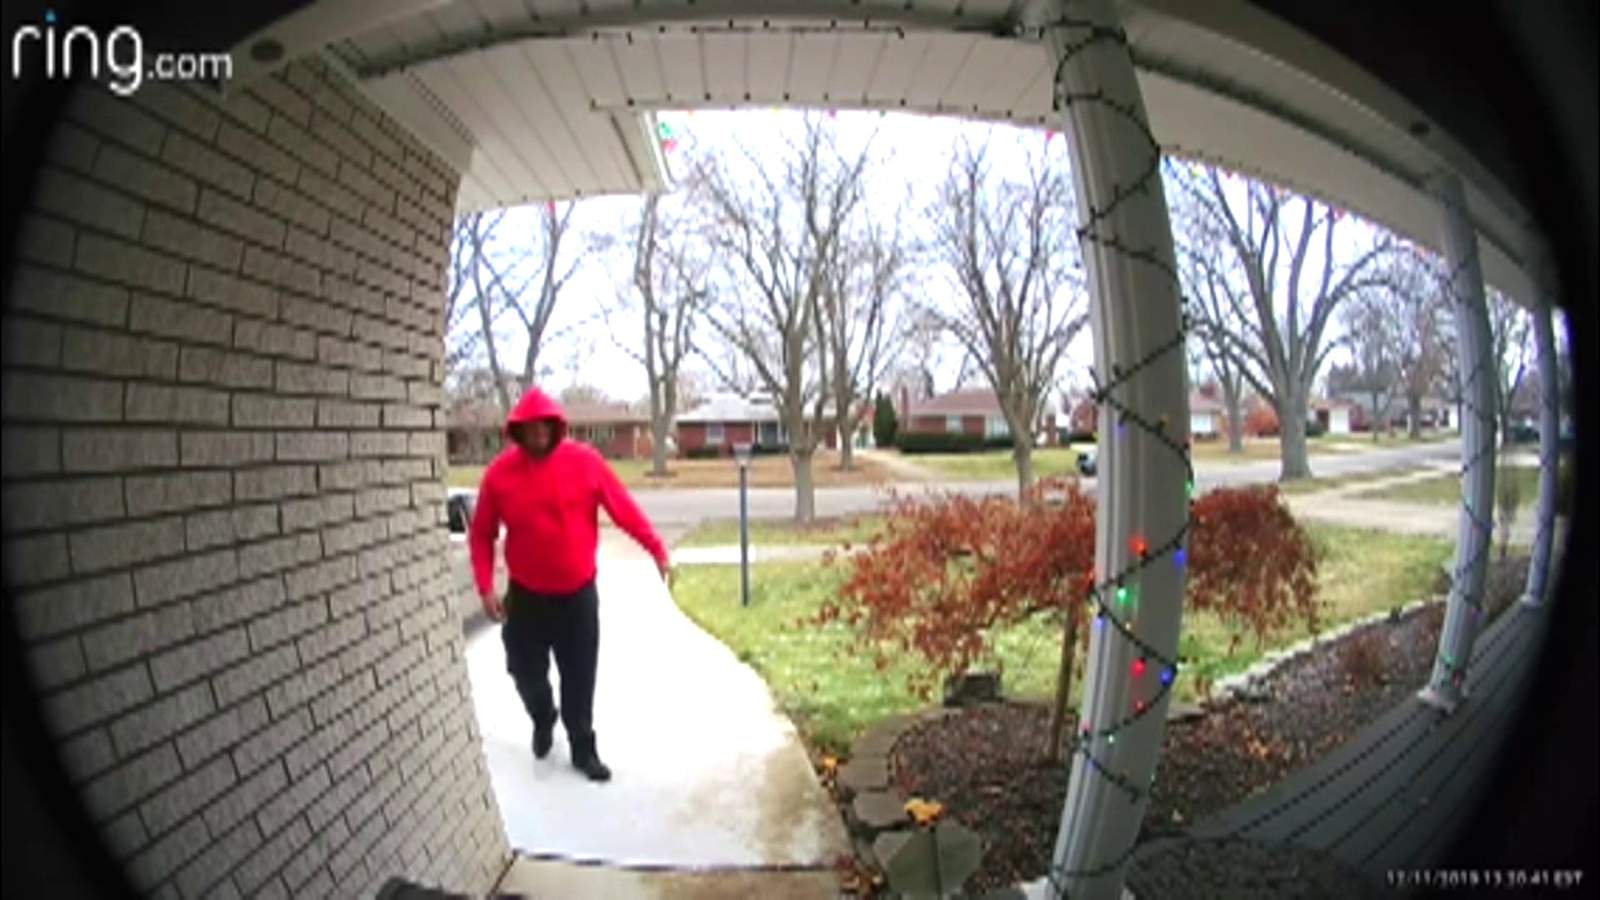 Man caught on camera swiping package from porch of Allen Park home